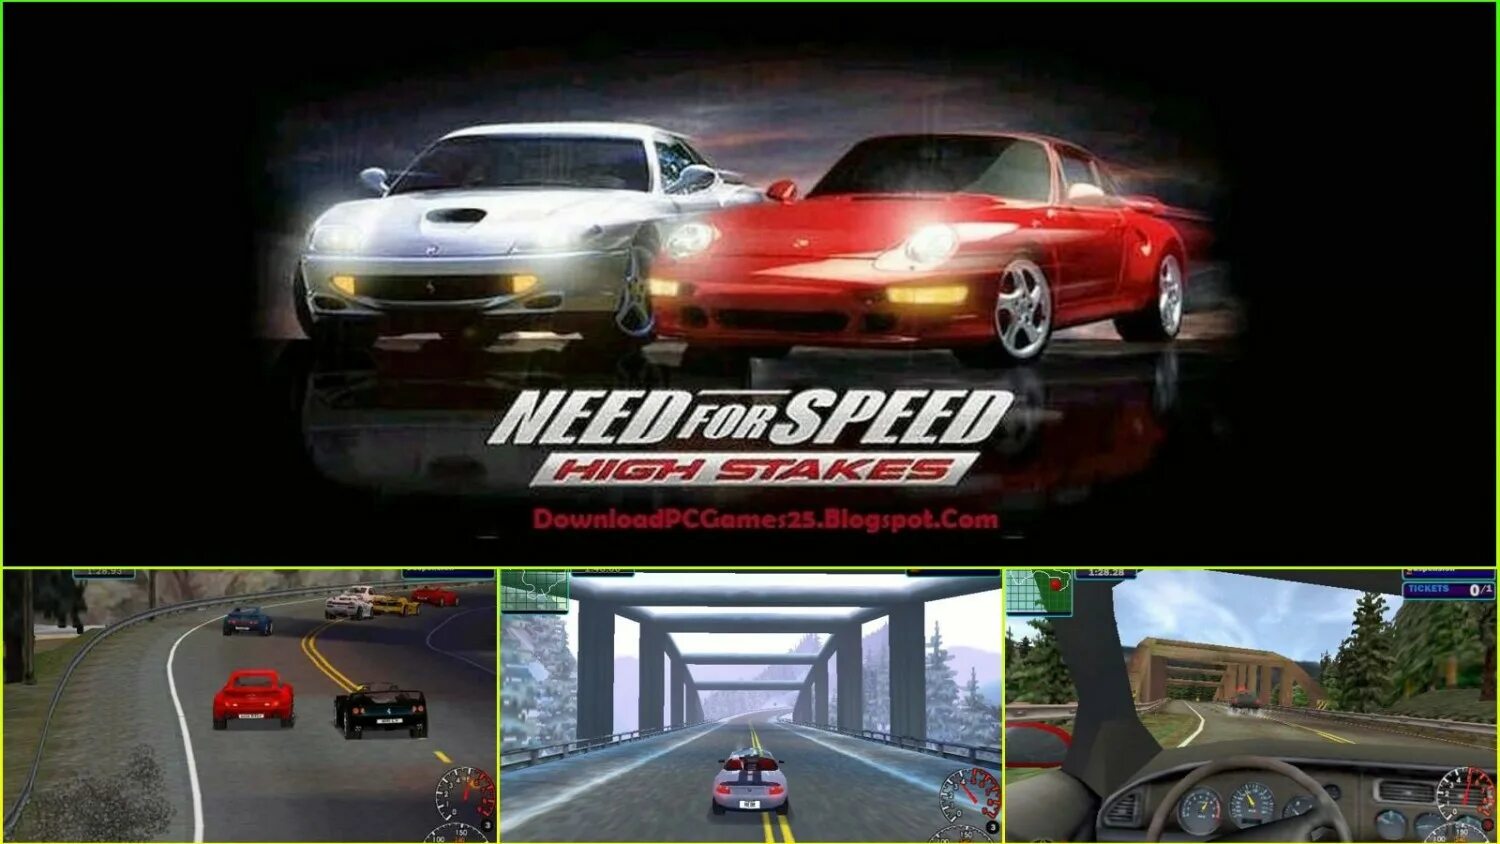 High stakes 4. Need for Speed High stakes обложка. NFS 4 High stakes. Need for Speed 4 High stakes. Need for Speed High stakes ps1.